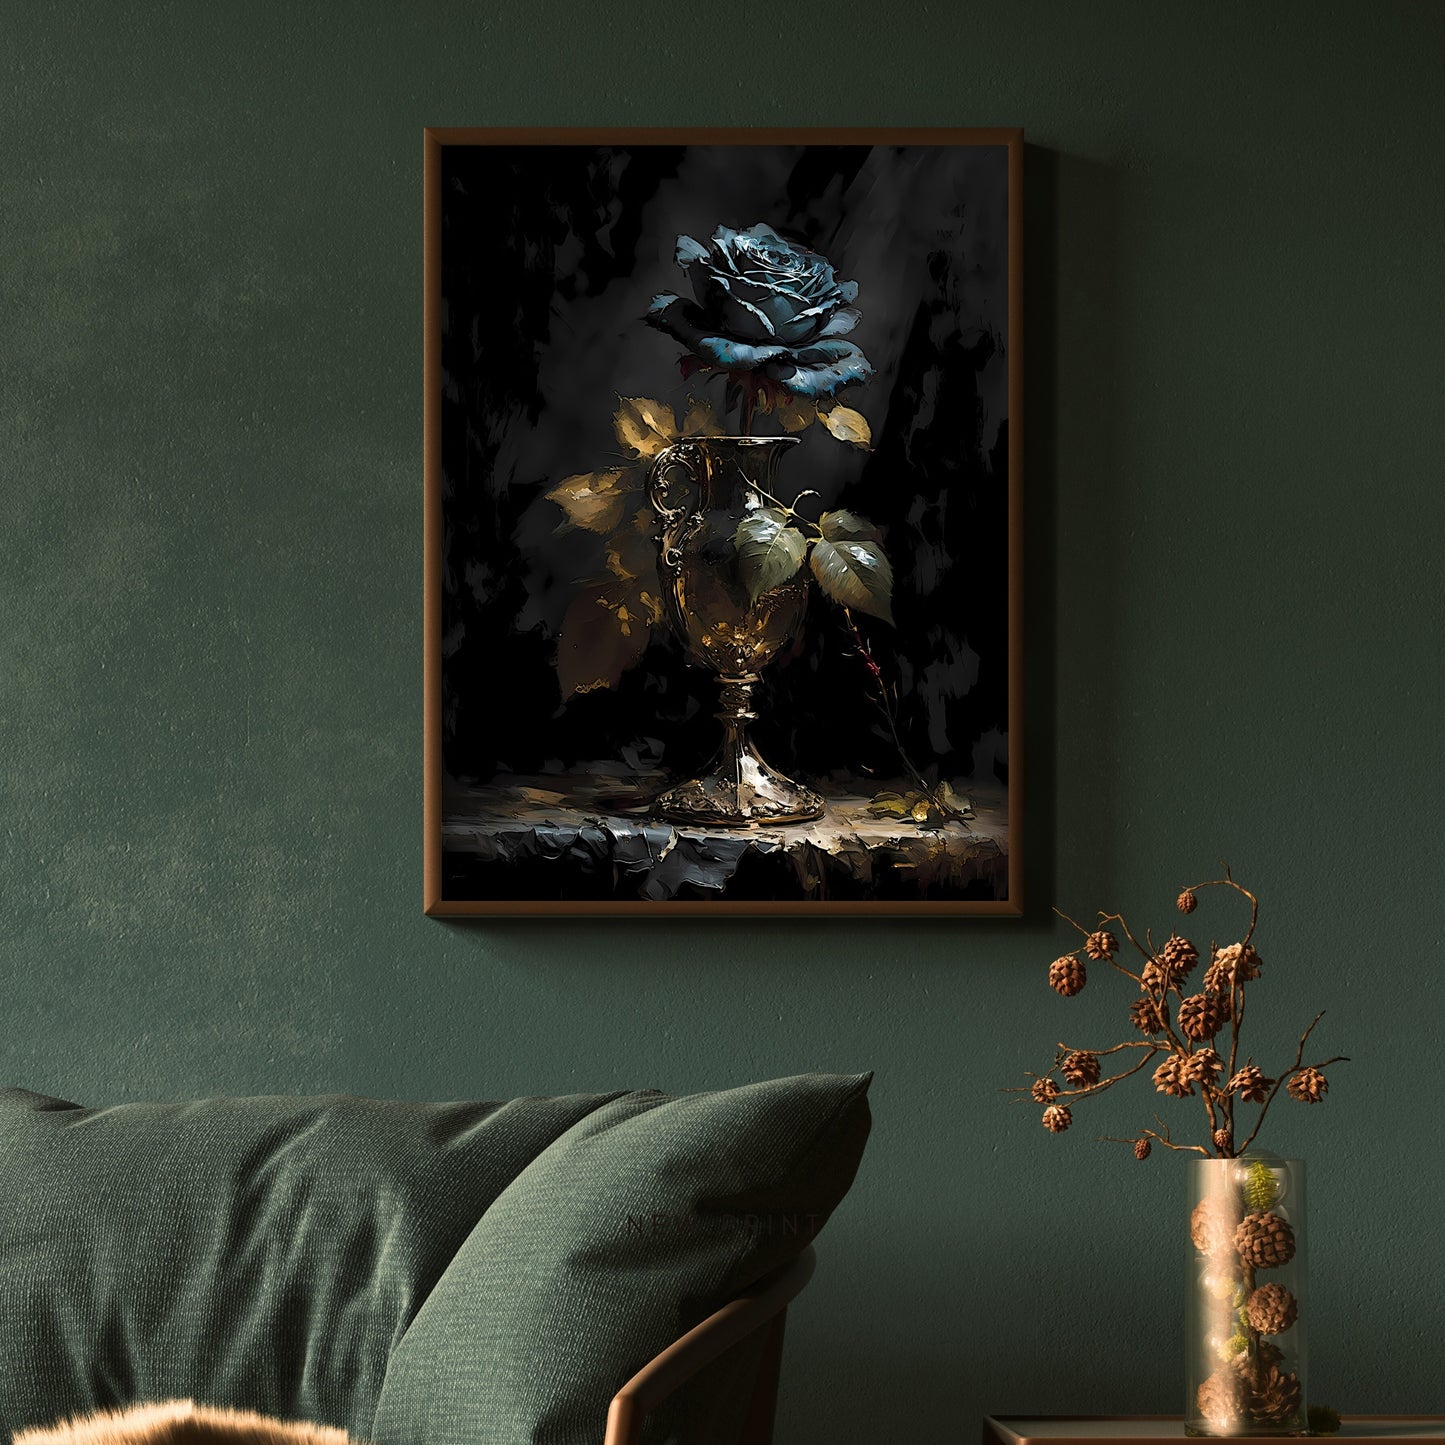 Blue Rose in Goblet Paper Poster Prints Wall Art Vintage Oil Painting Dark Academia Gothic Floral Moody Painting Botanical Decor Dark Cottagecore